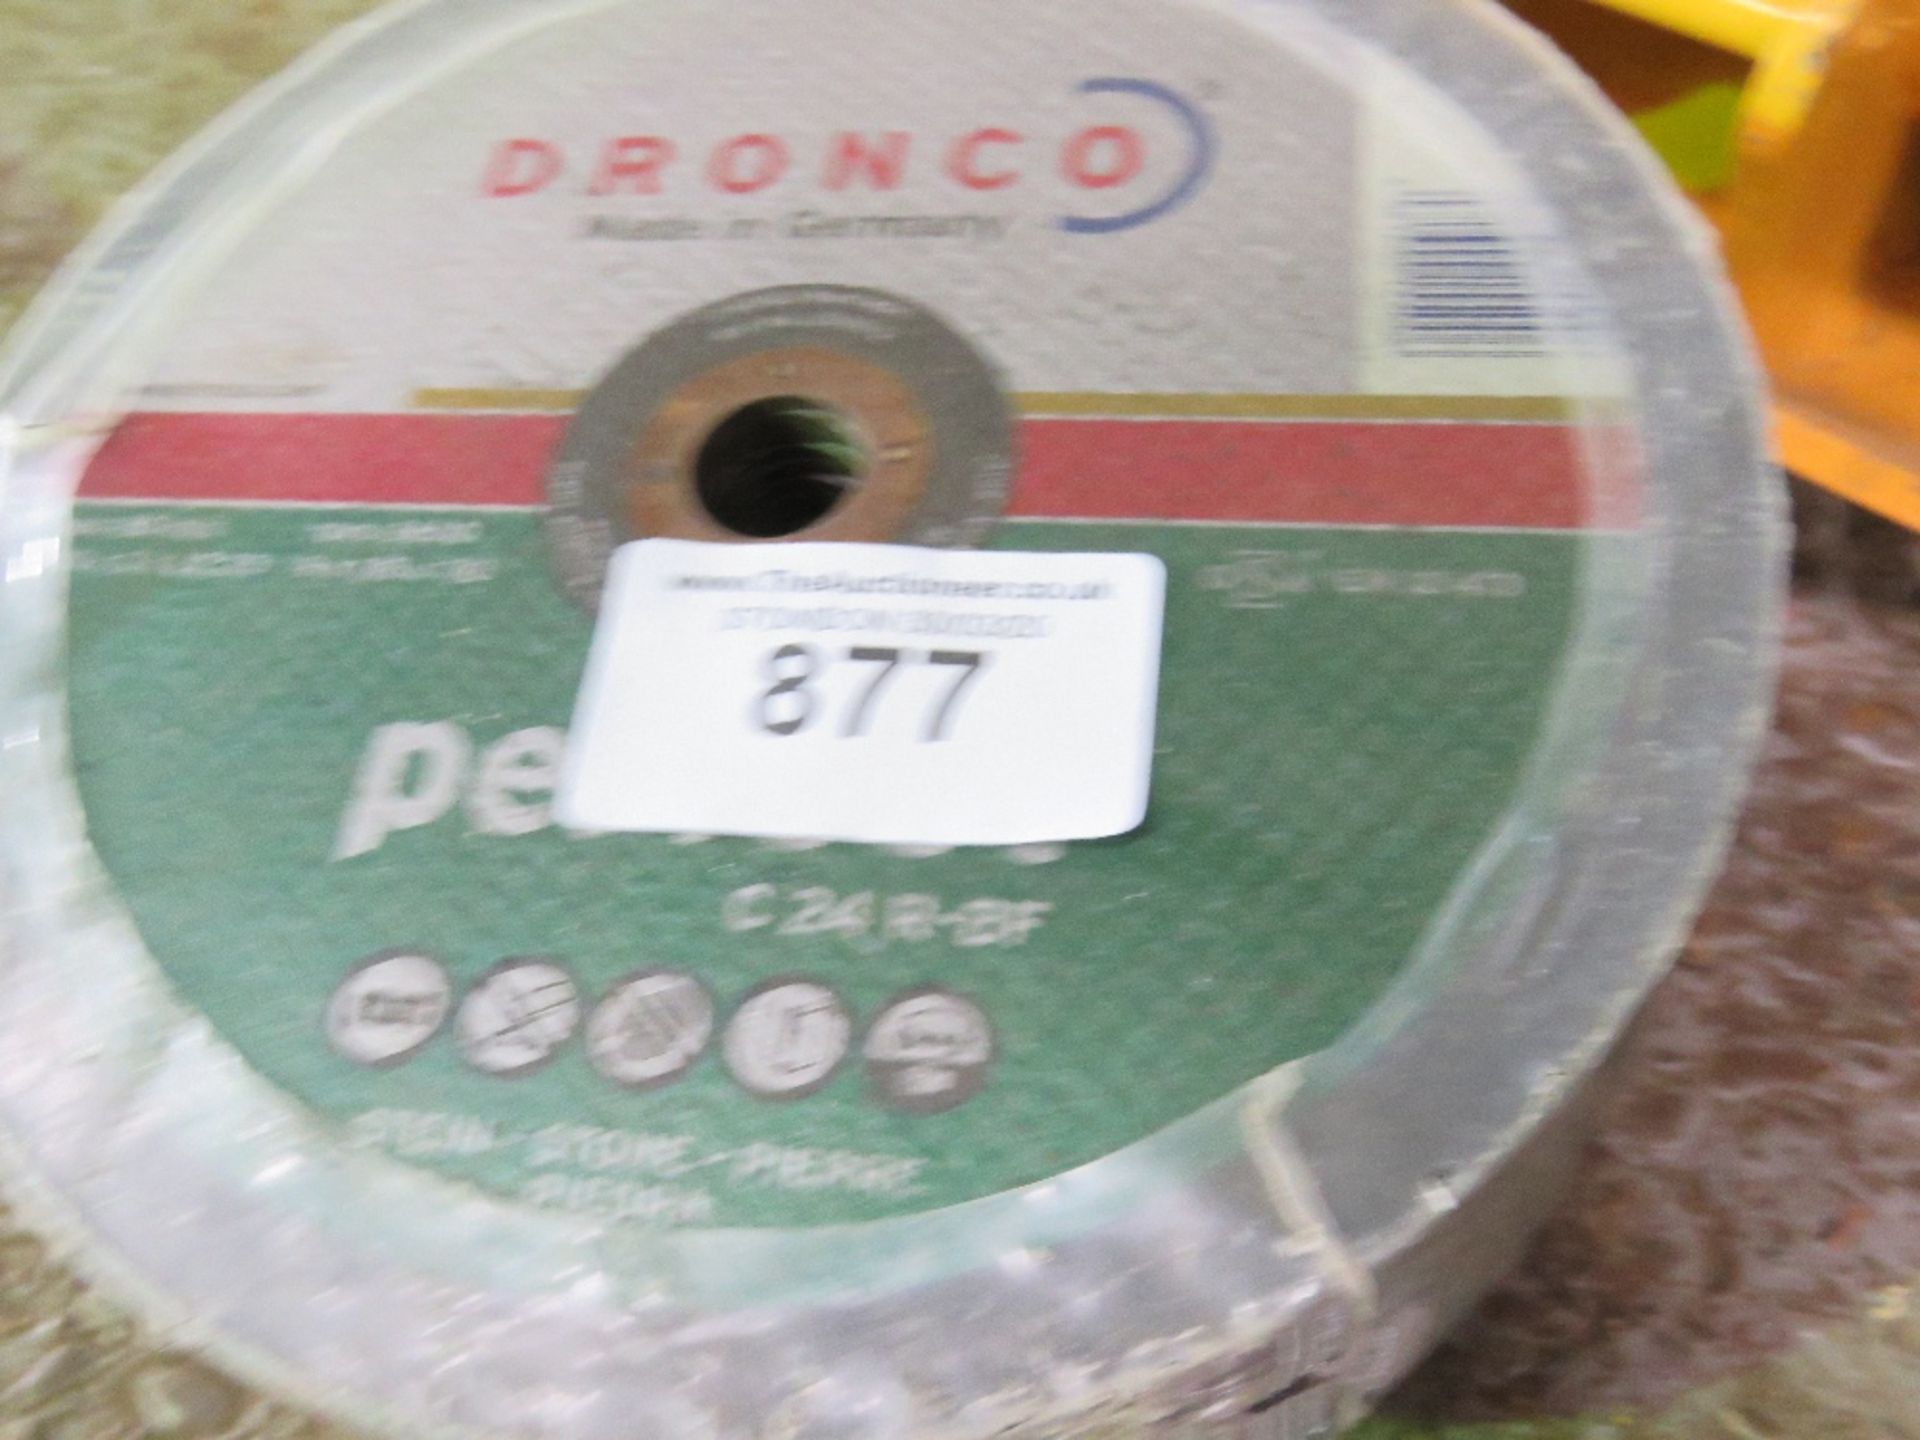 2no. Packs of grinding/cutting discs